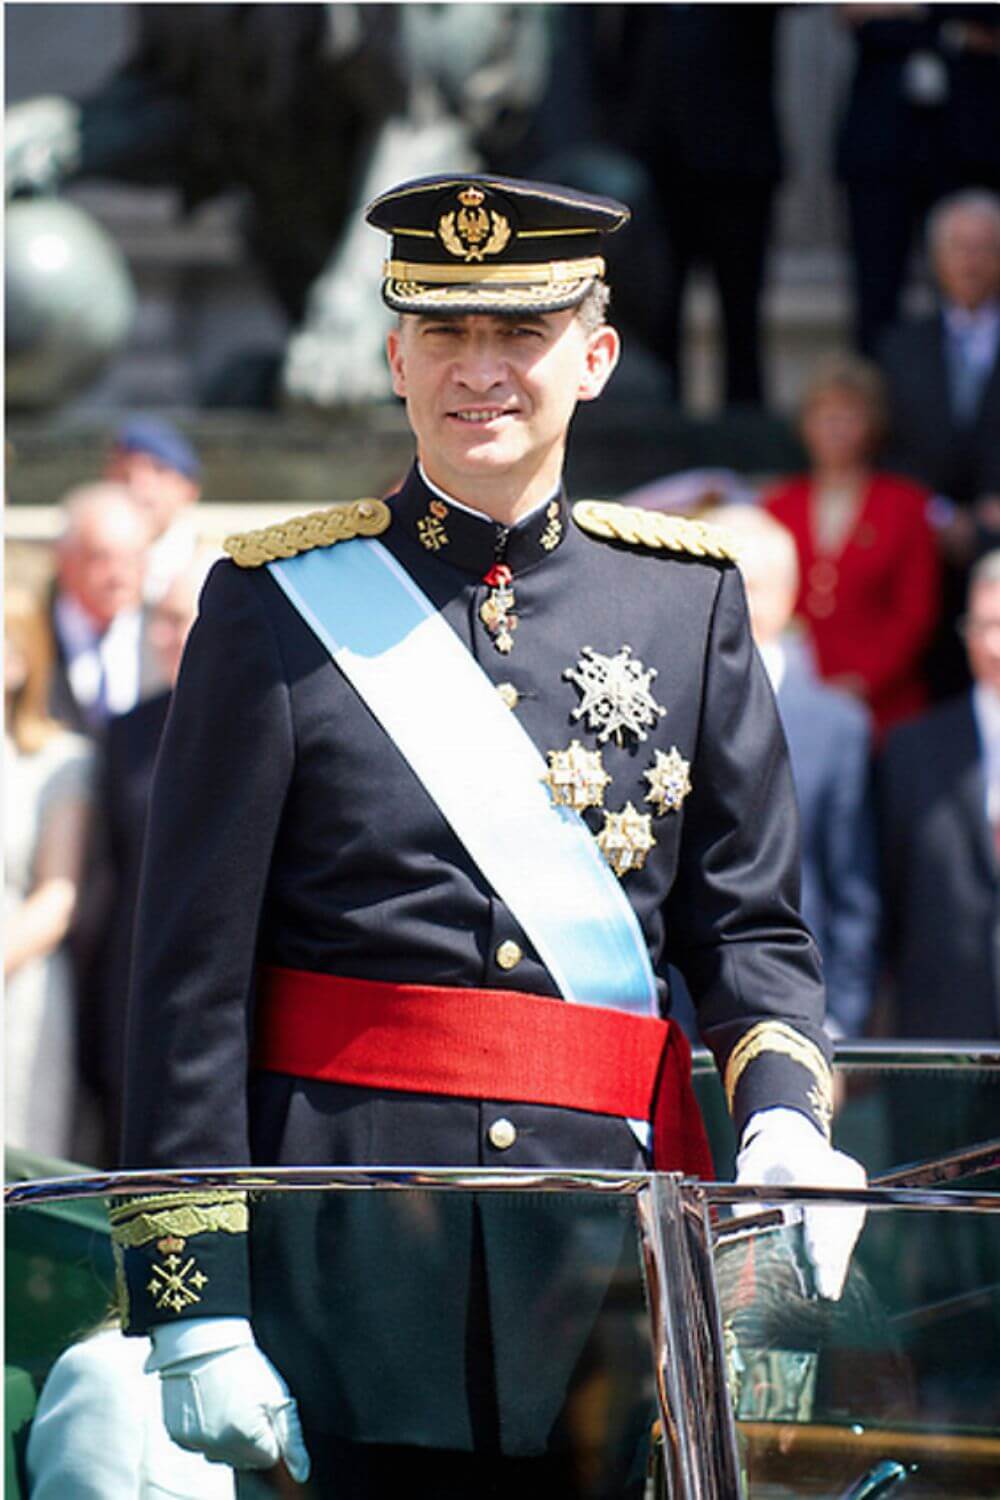 King Felipe VI wearing a handsome military uniform on his wedding day